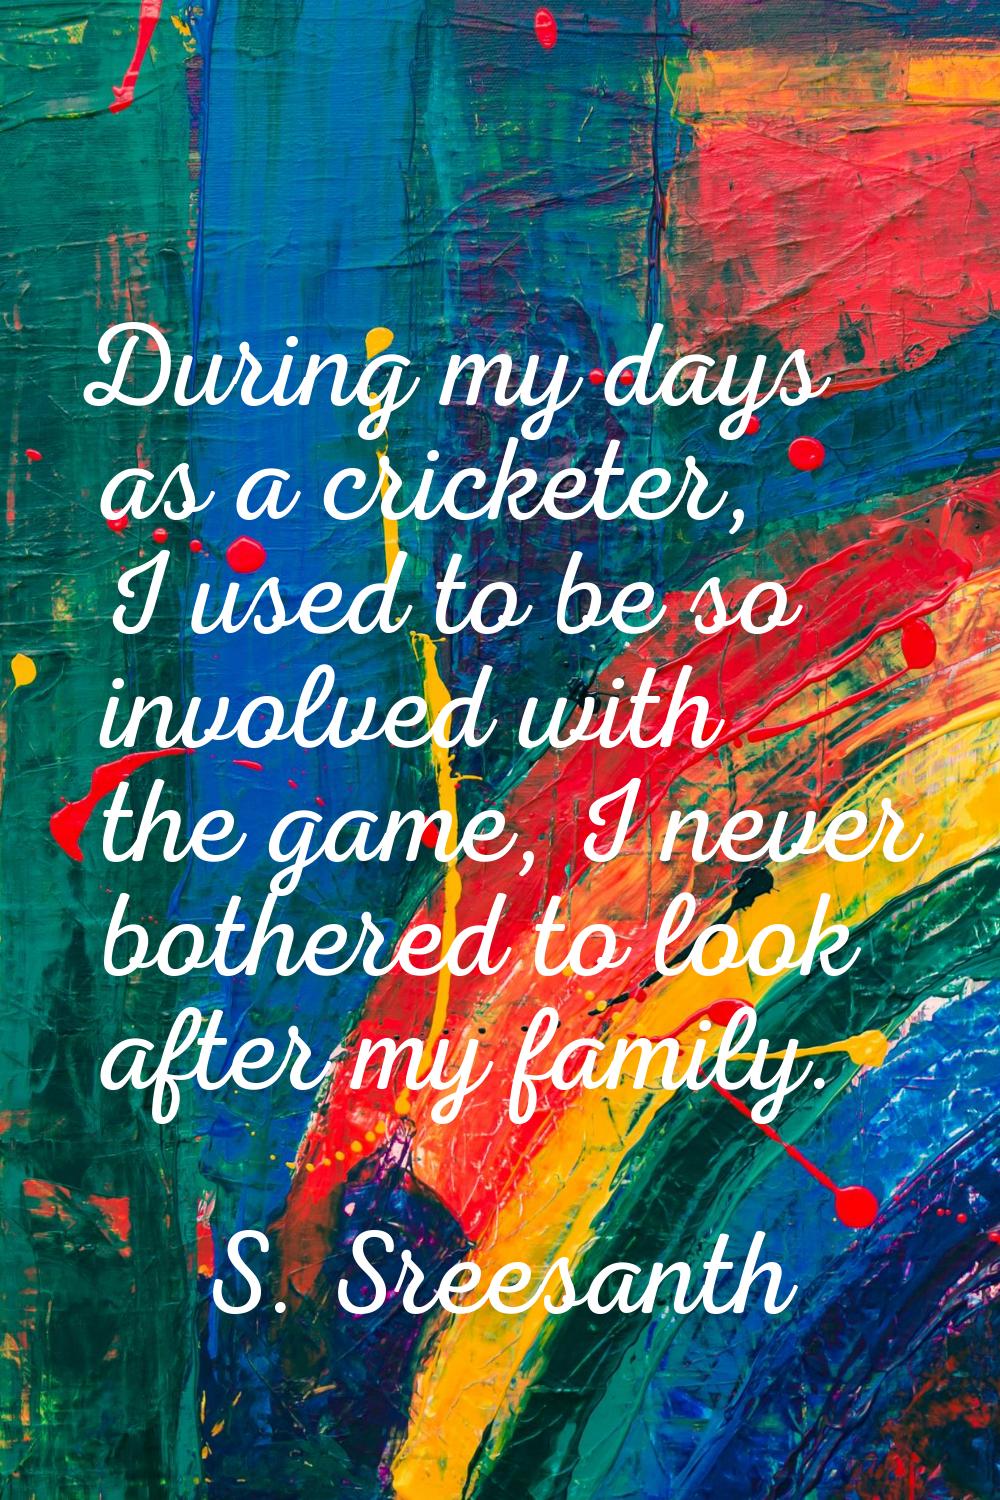 During my days as a cricketer, I used to be so involved with the game, I never bothered to look aft